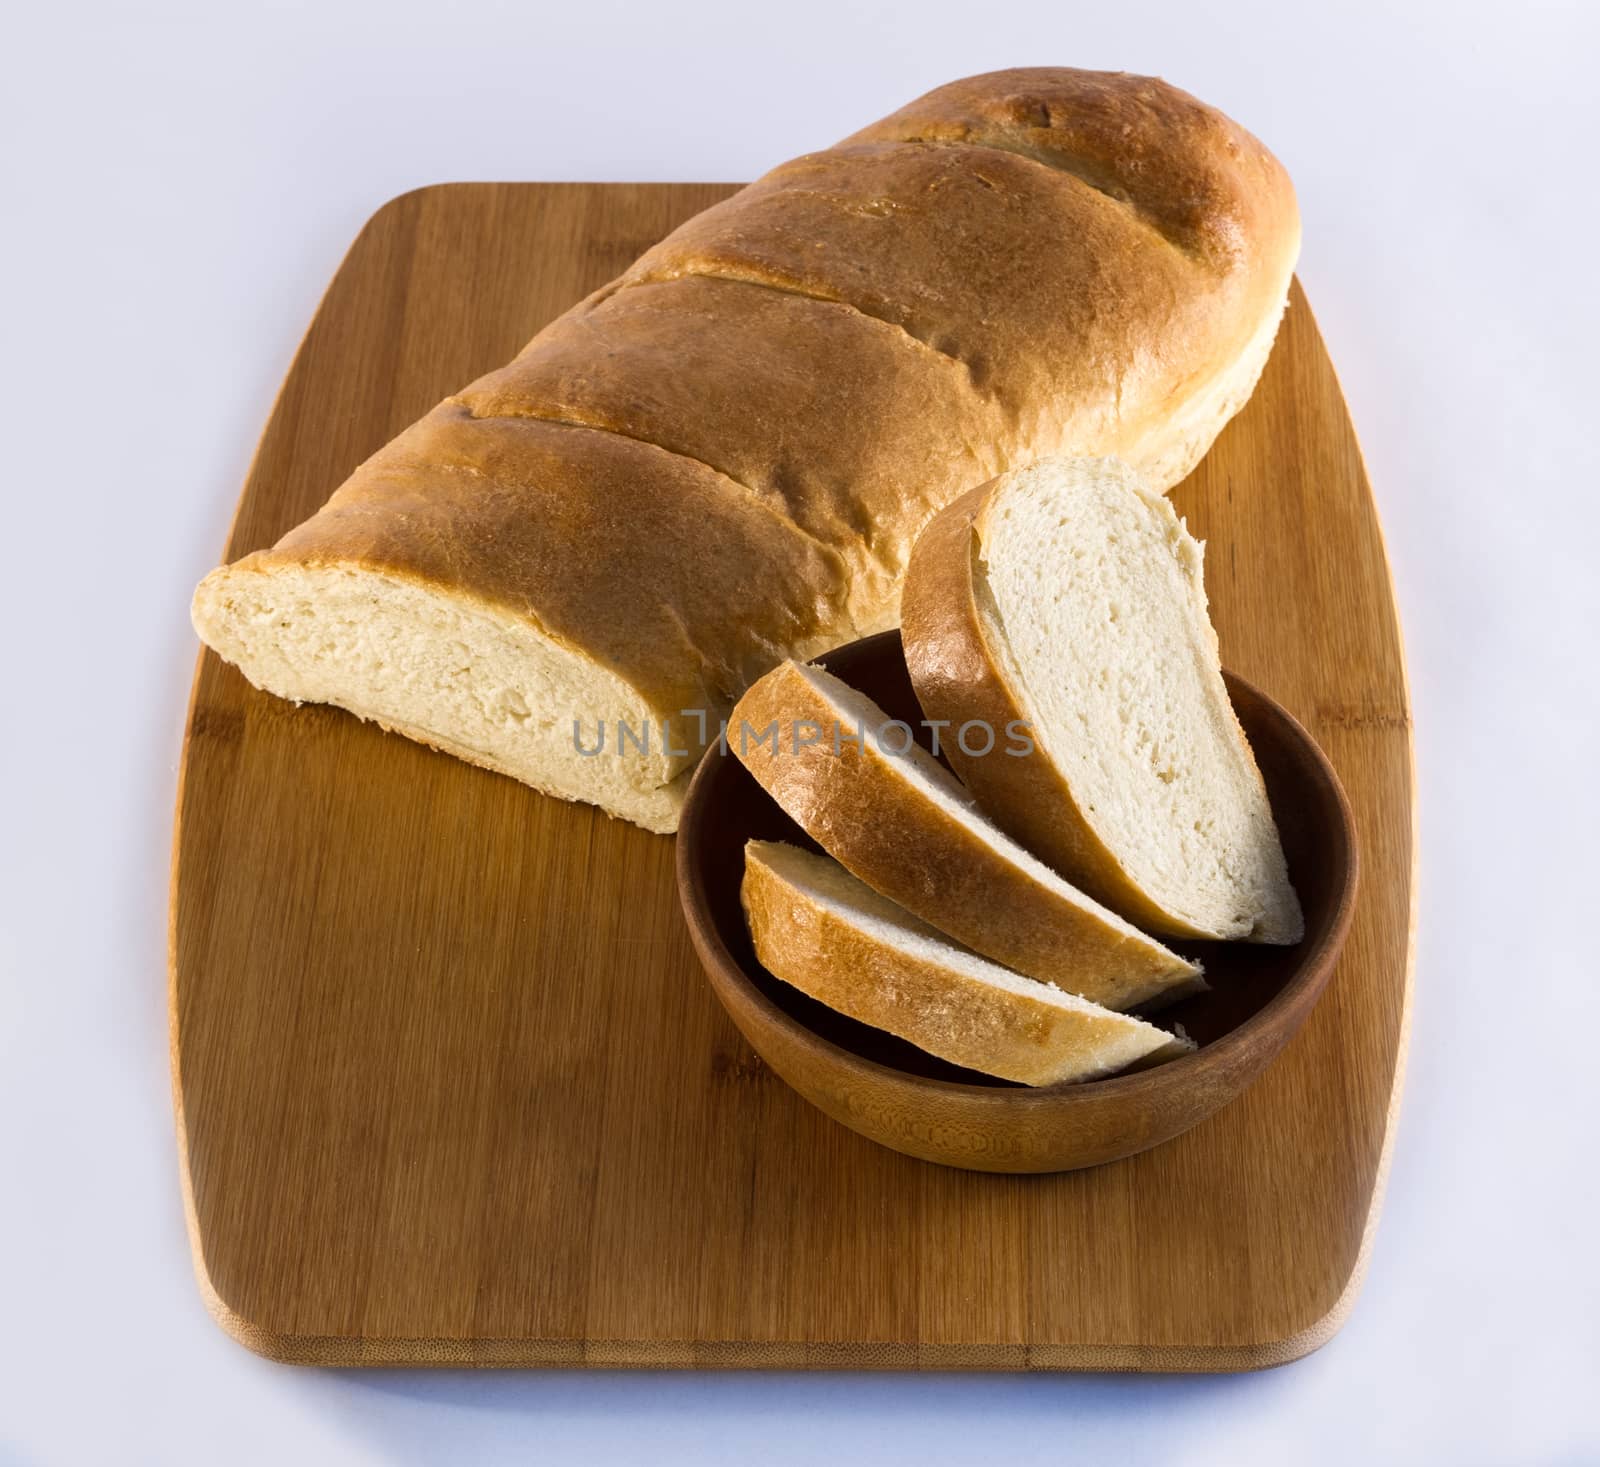 Fresh French bread loaf on wooden cutting board, with sliced bread in wooden bowl